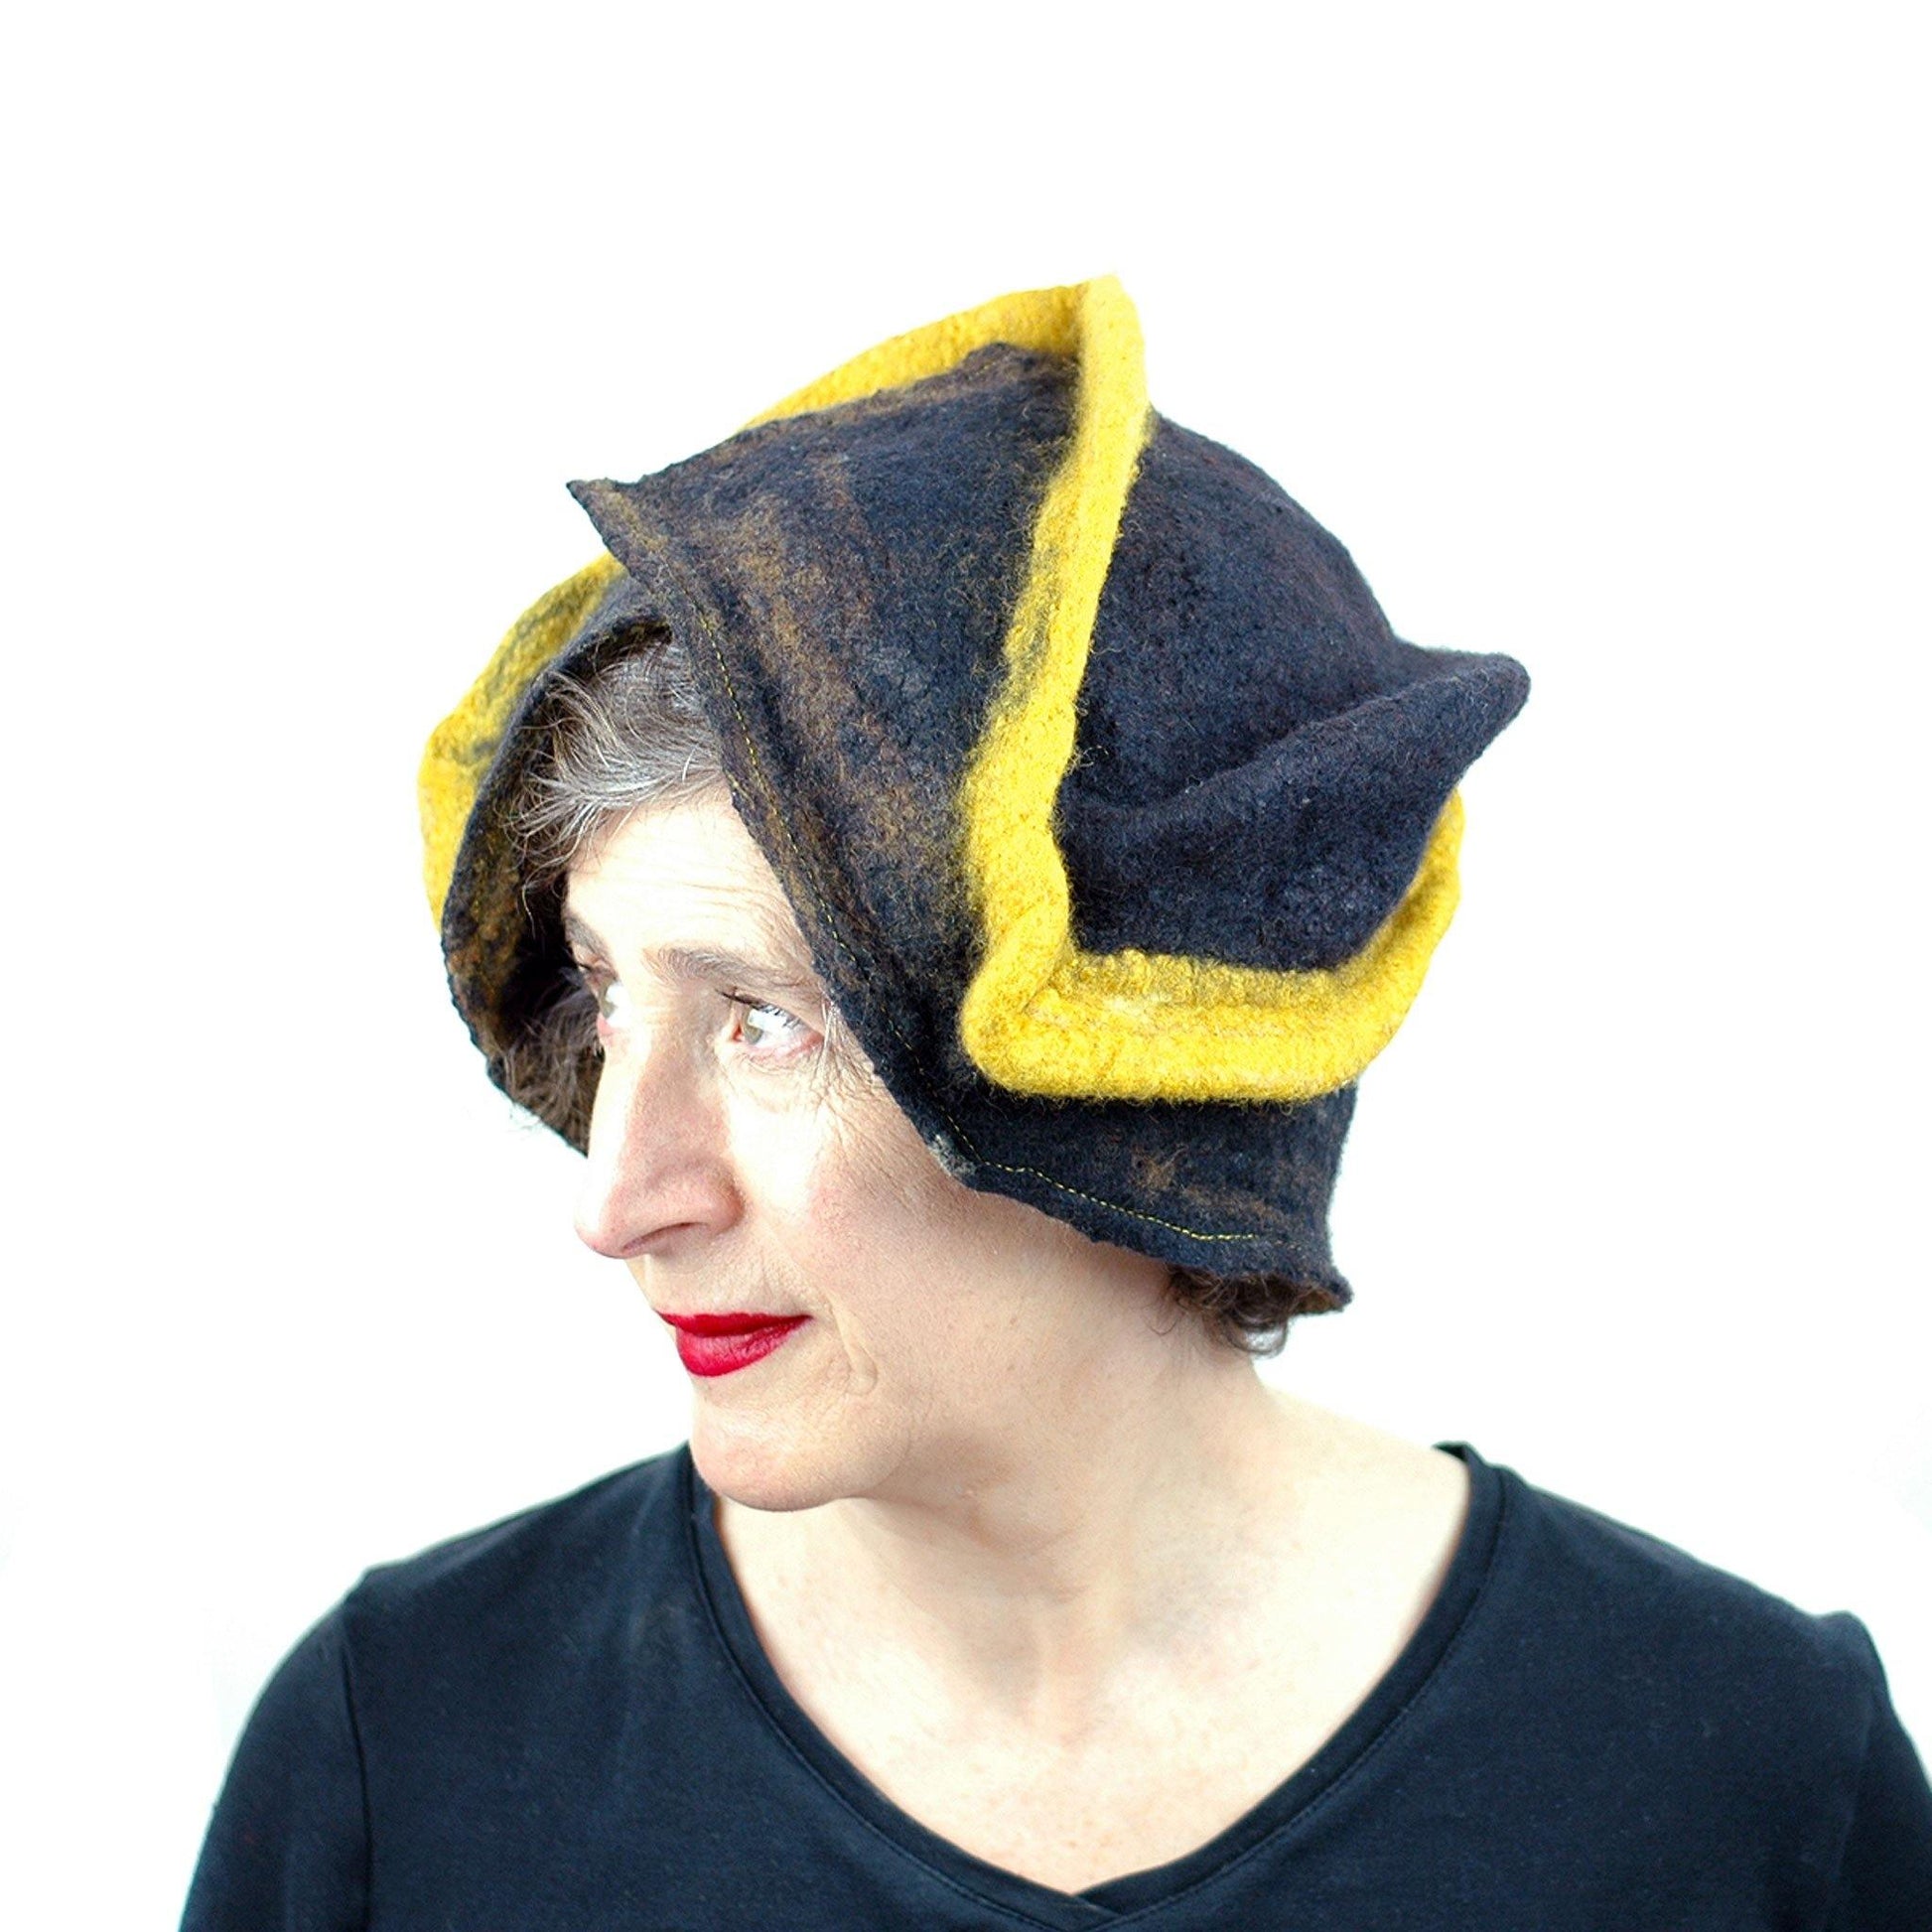 Black and Gold Wizard Hat for Pittsburgh or Hufflepuff Fans - three quarters view